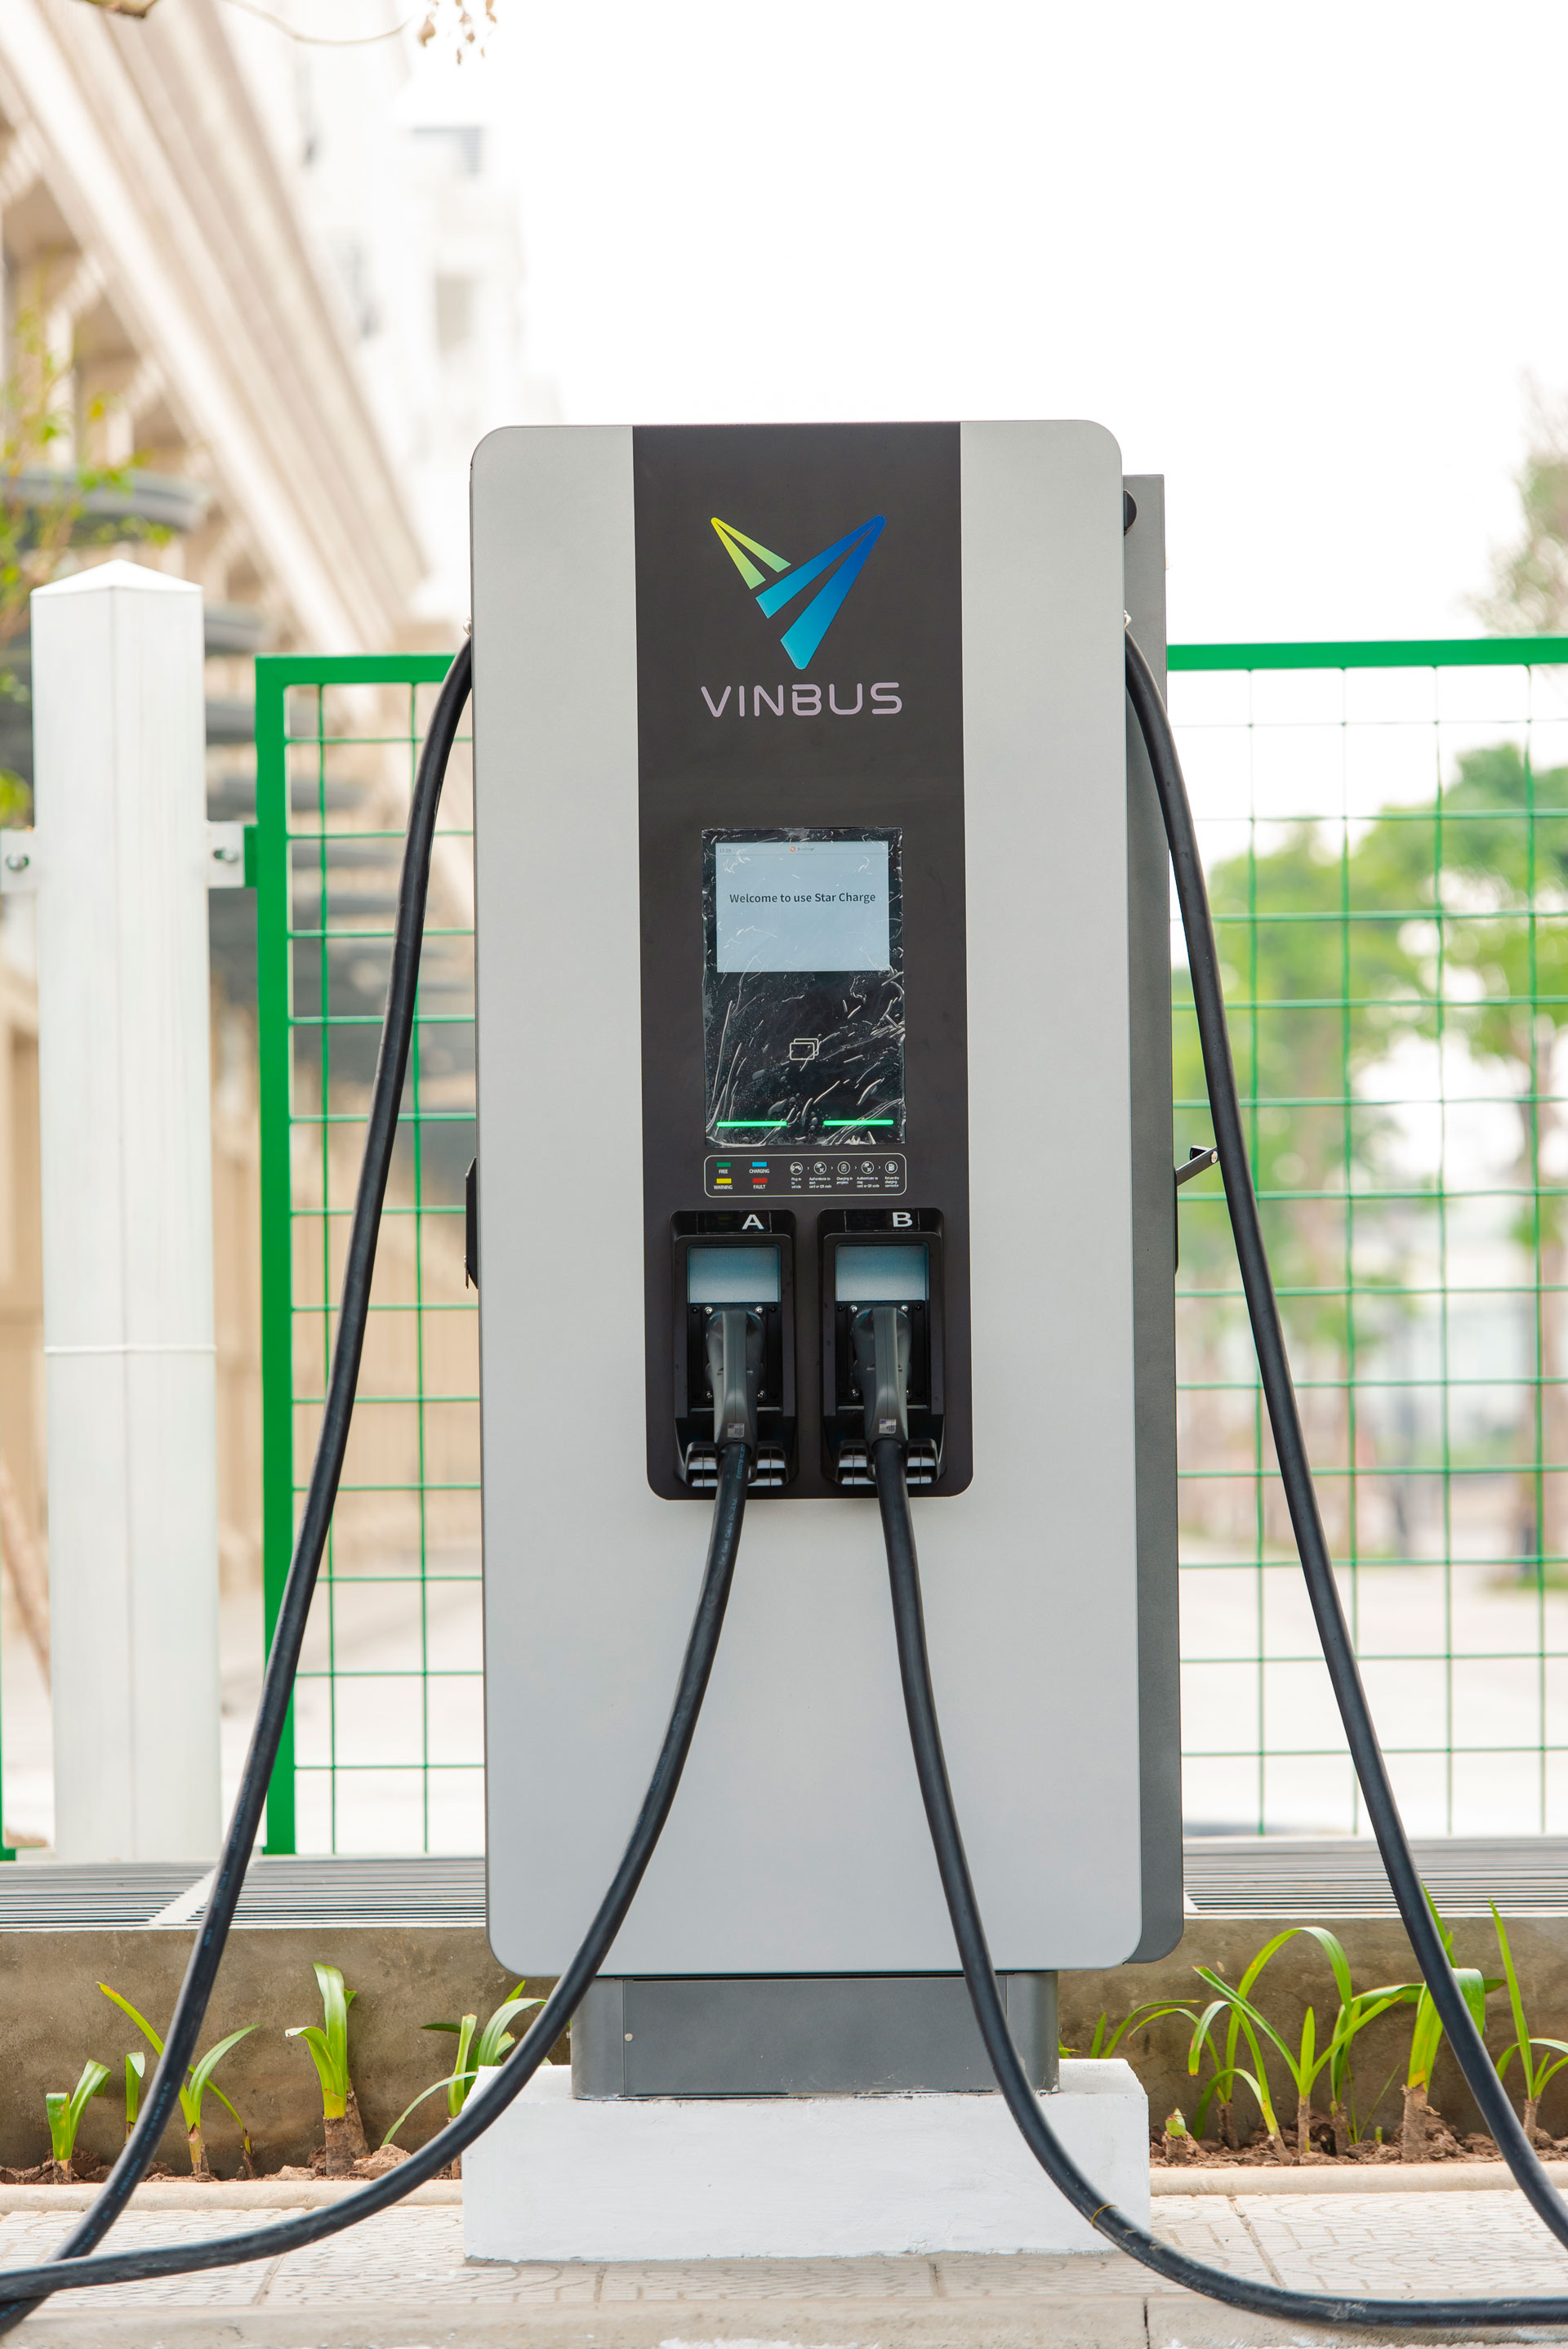 VinBus & Star Charge signed a contract to electrify Vietnam’s bus system